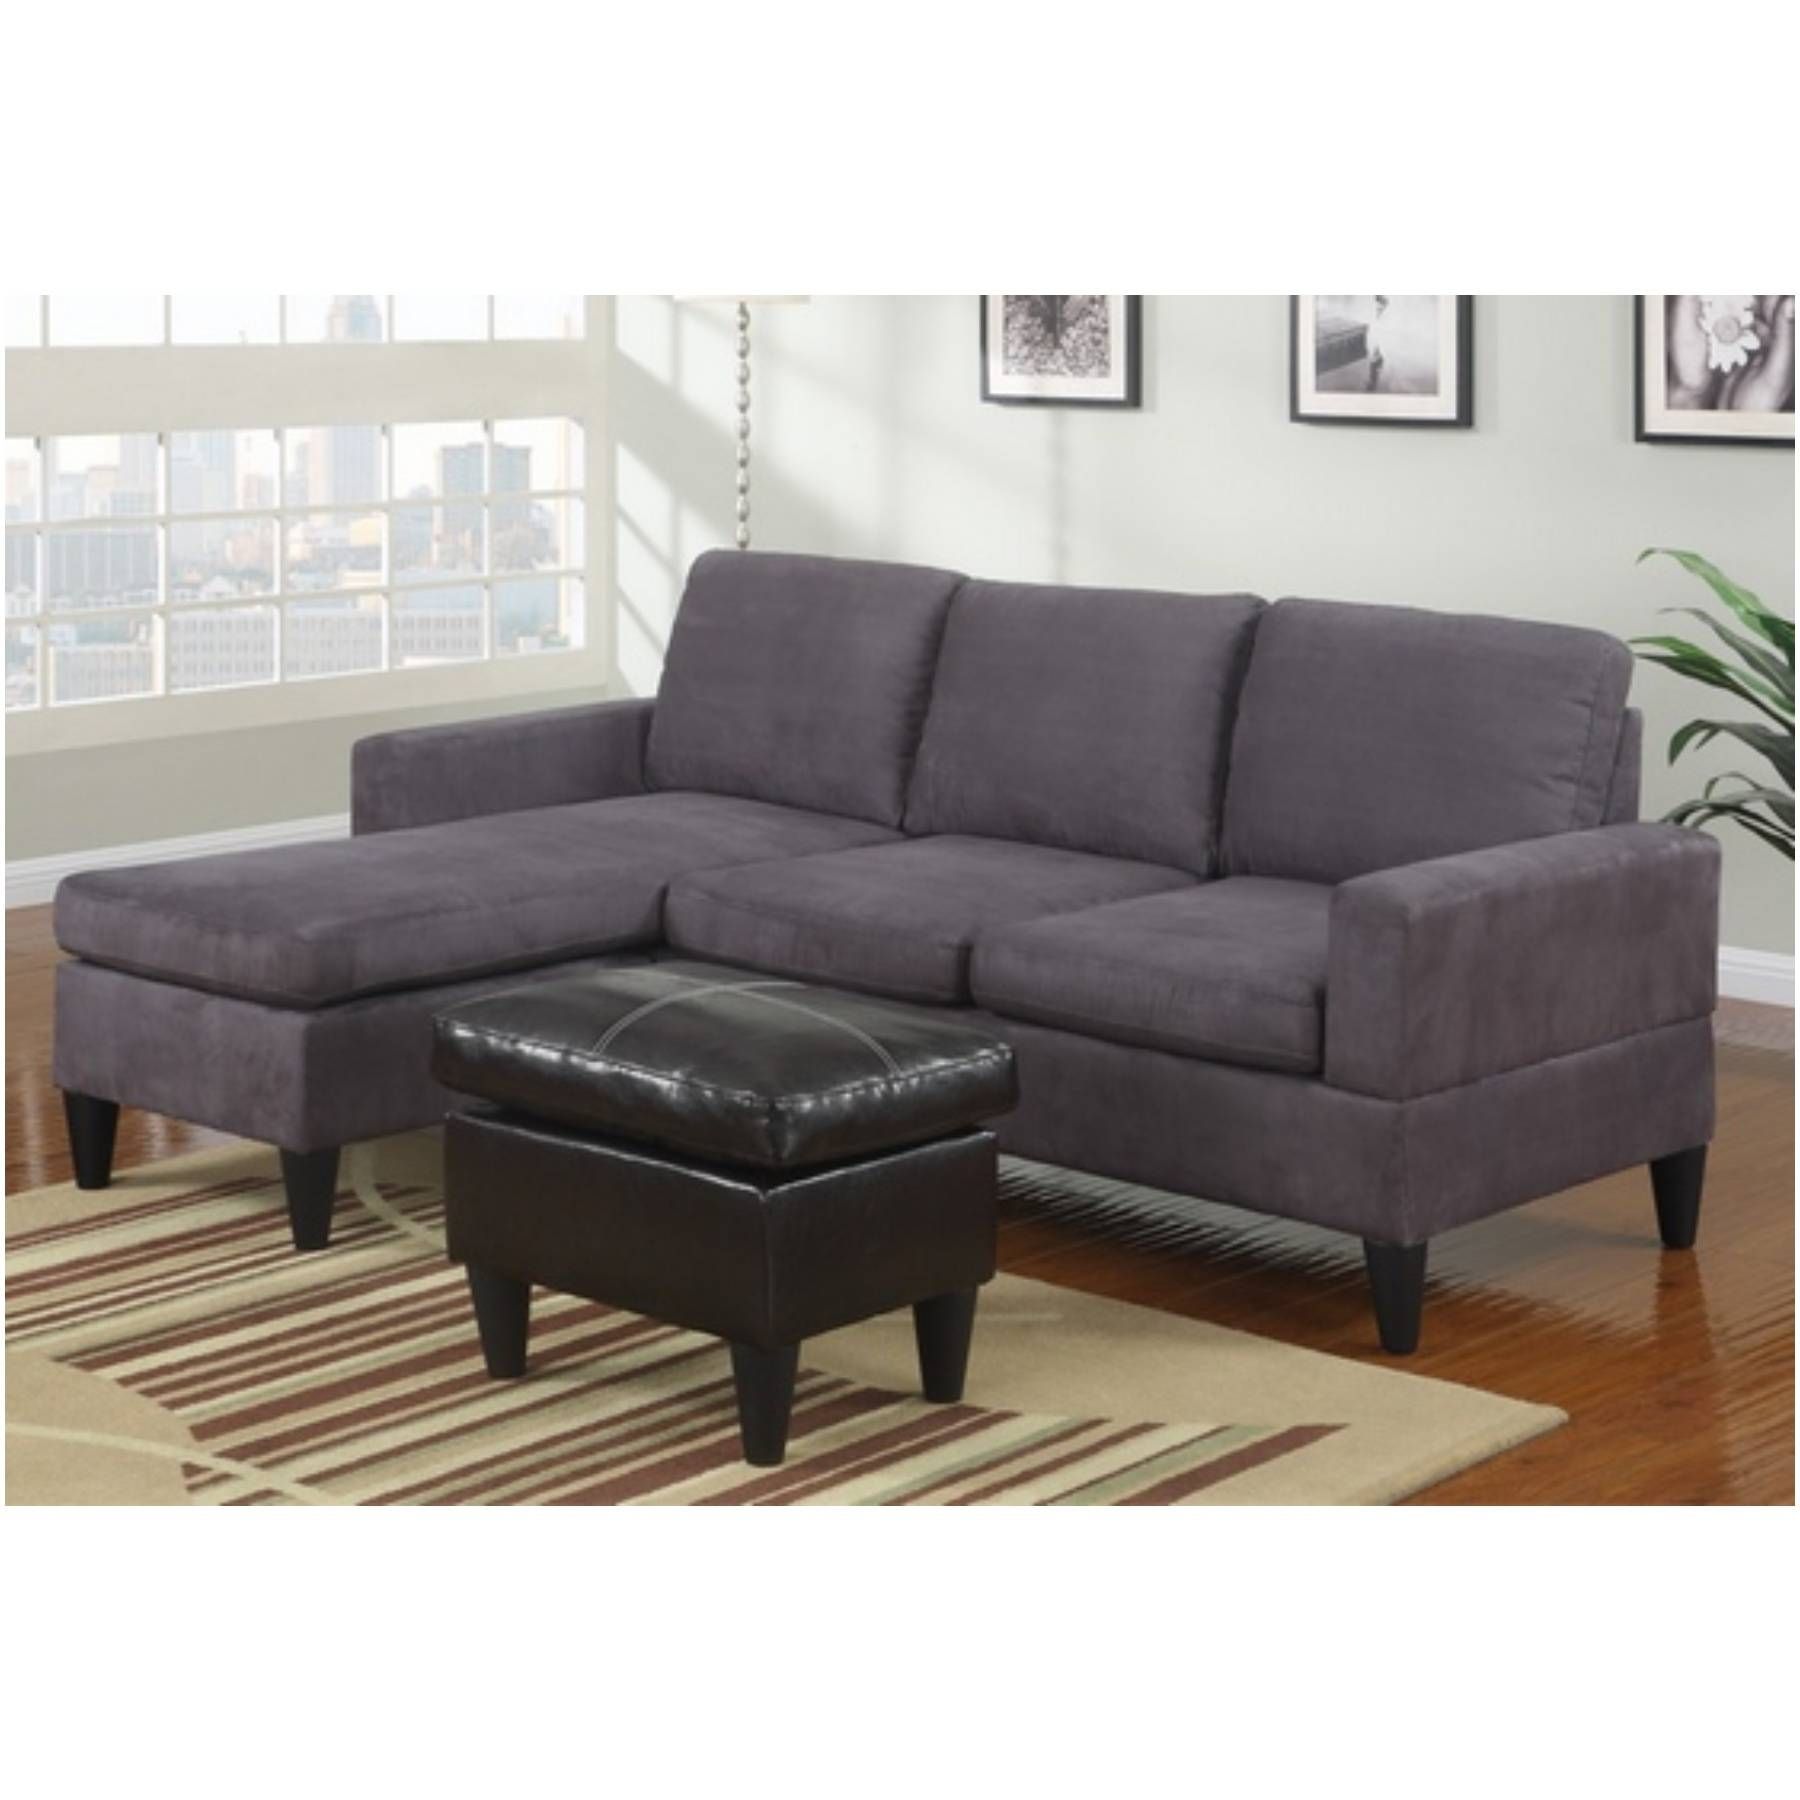 Apartment Sectional Sofa With Chaise | Tehranmix Decoration In Apartment Sectional Sofa With Chaise (Photo 9 of 30)